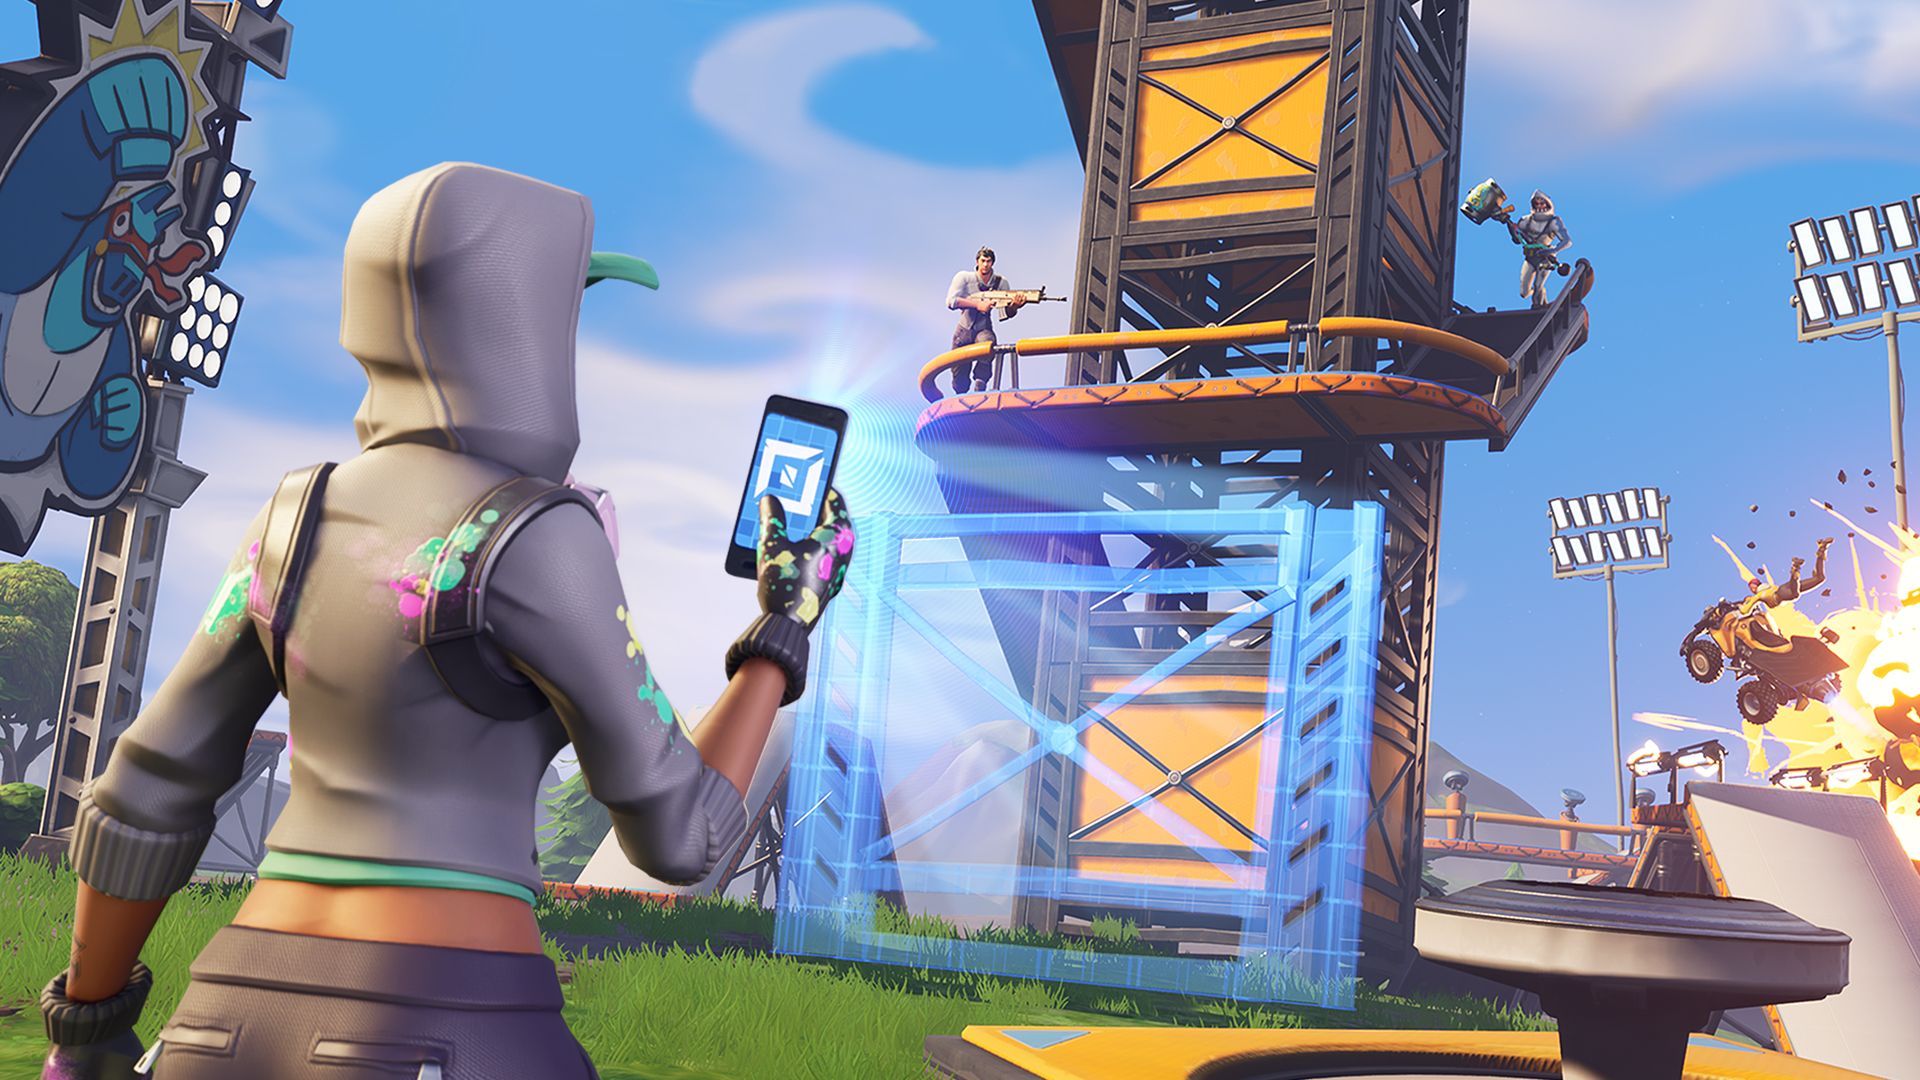 Creative Mode comes to Fortnite on December 6